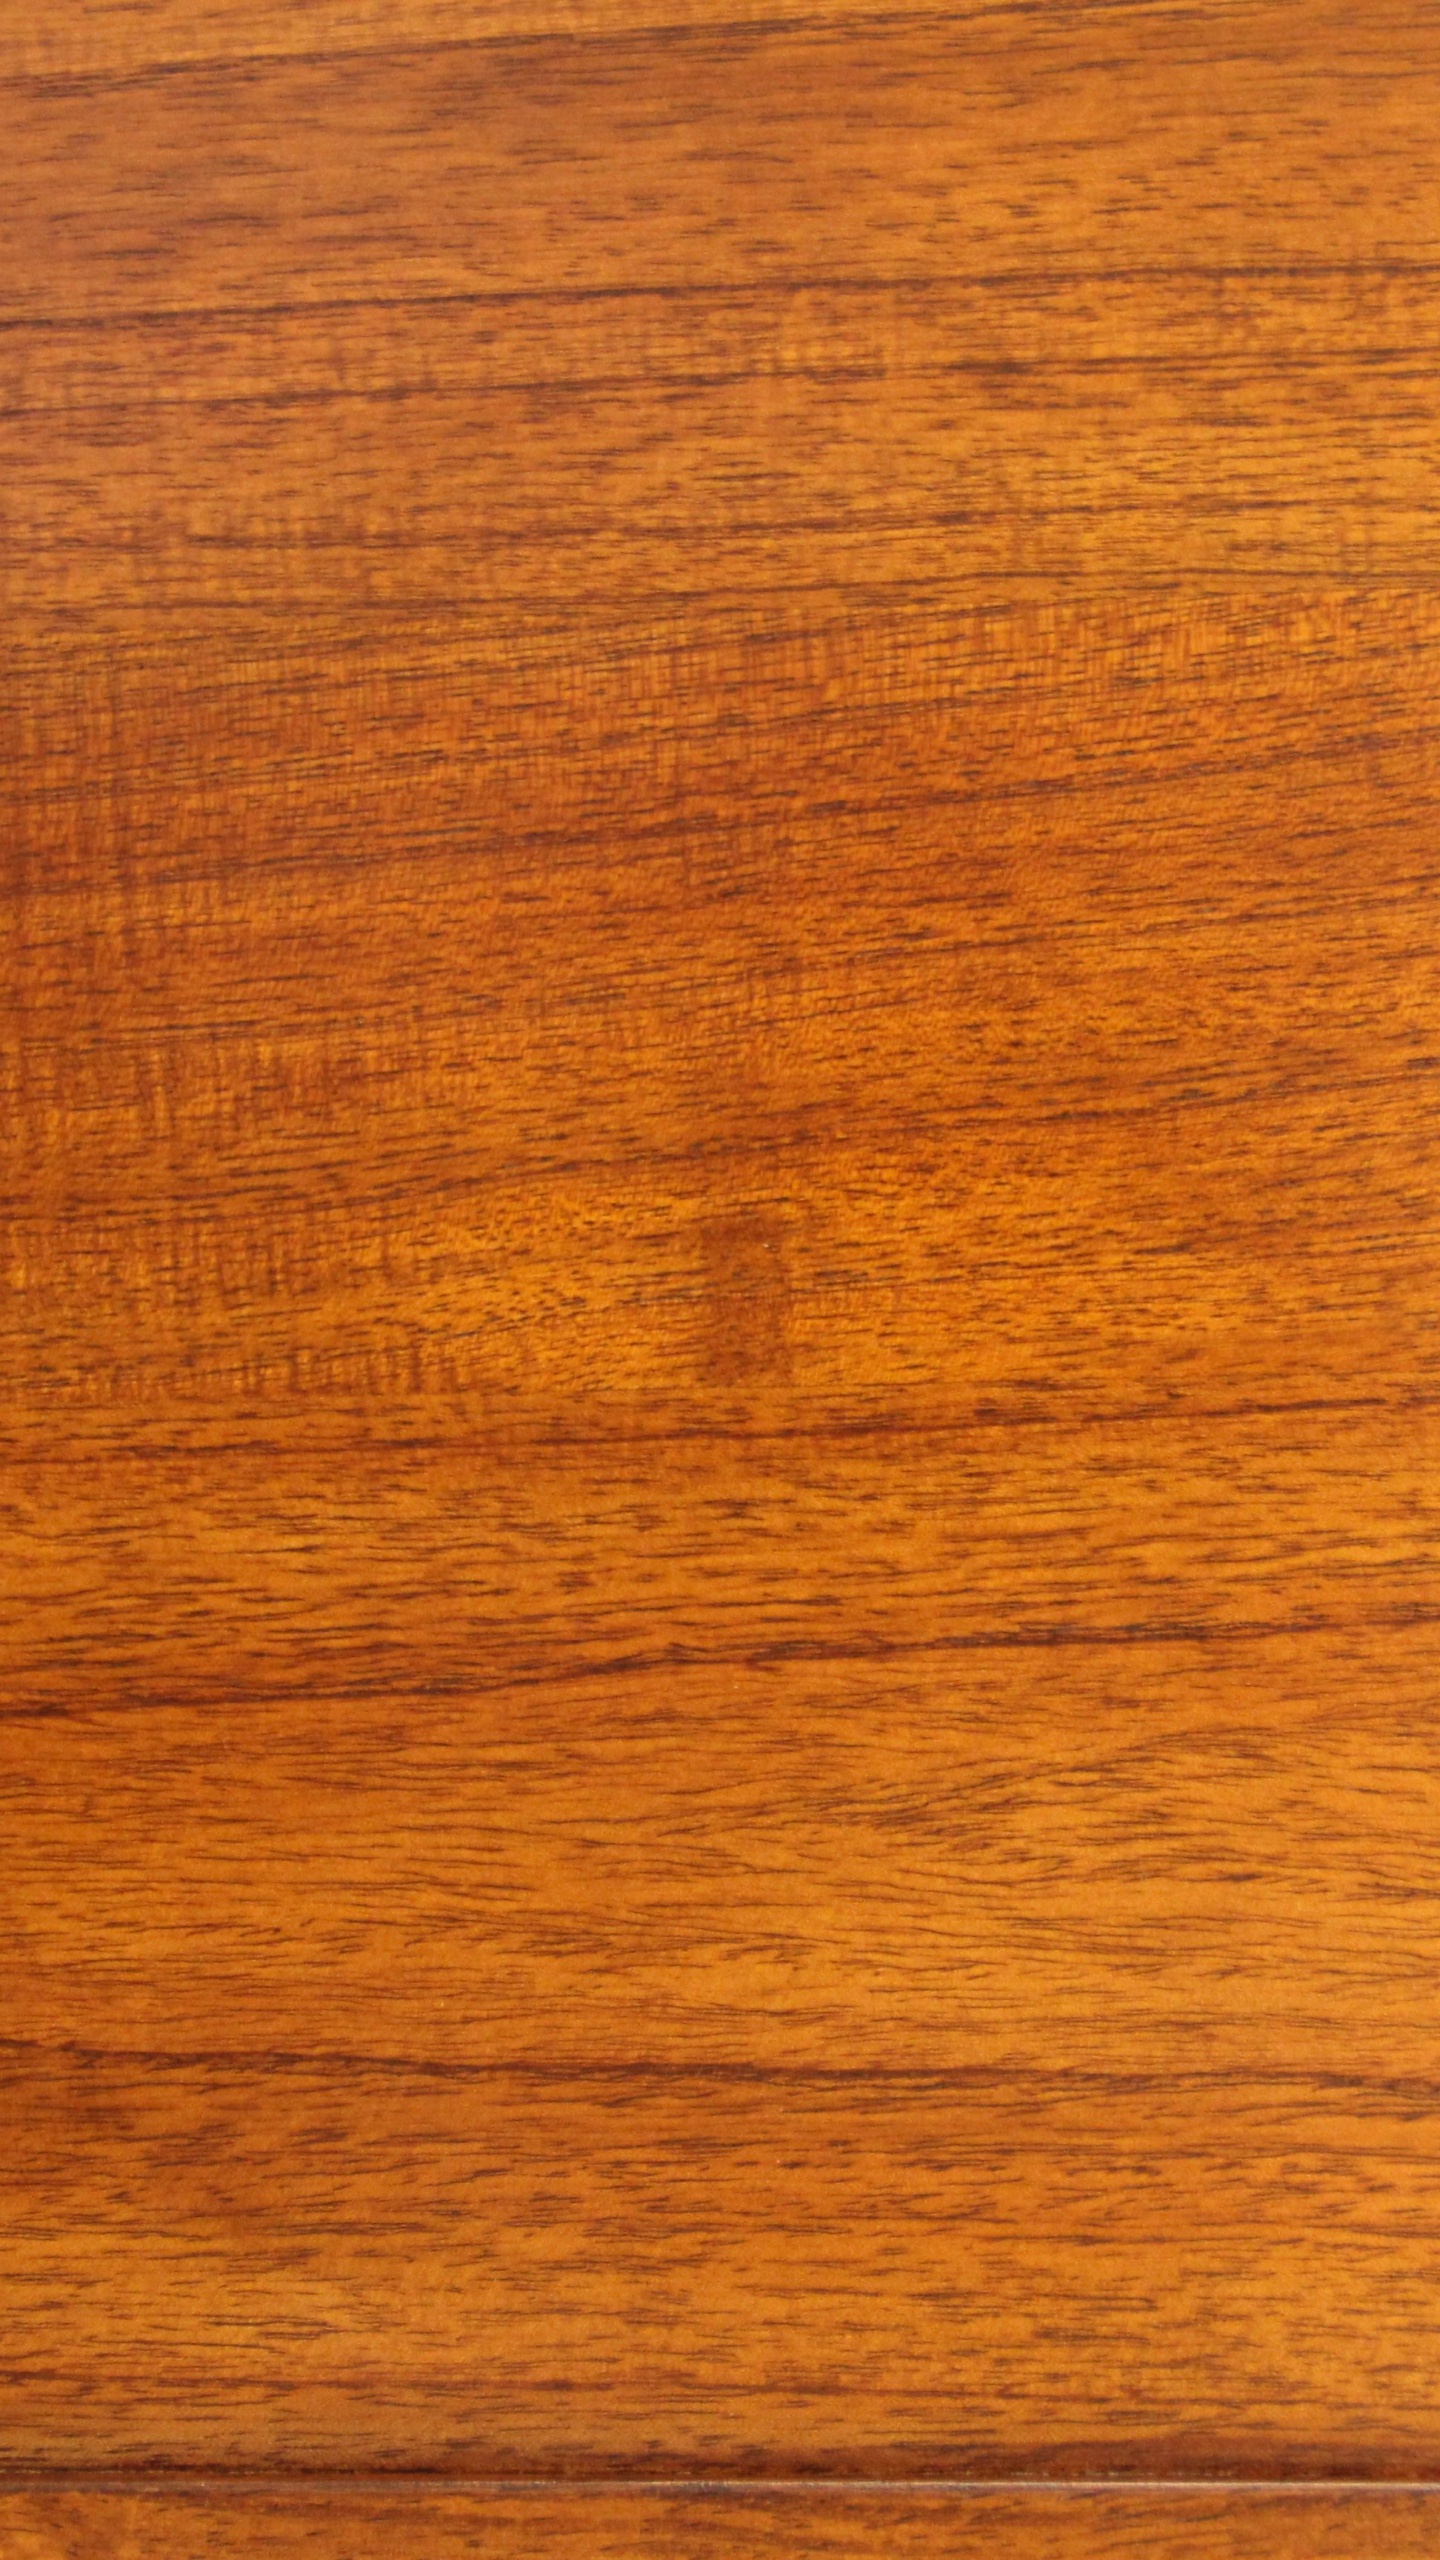 Brown Wooden Table With White Paper. Wallpaper in 1440x2560 Resolution